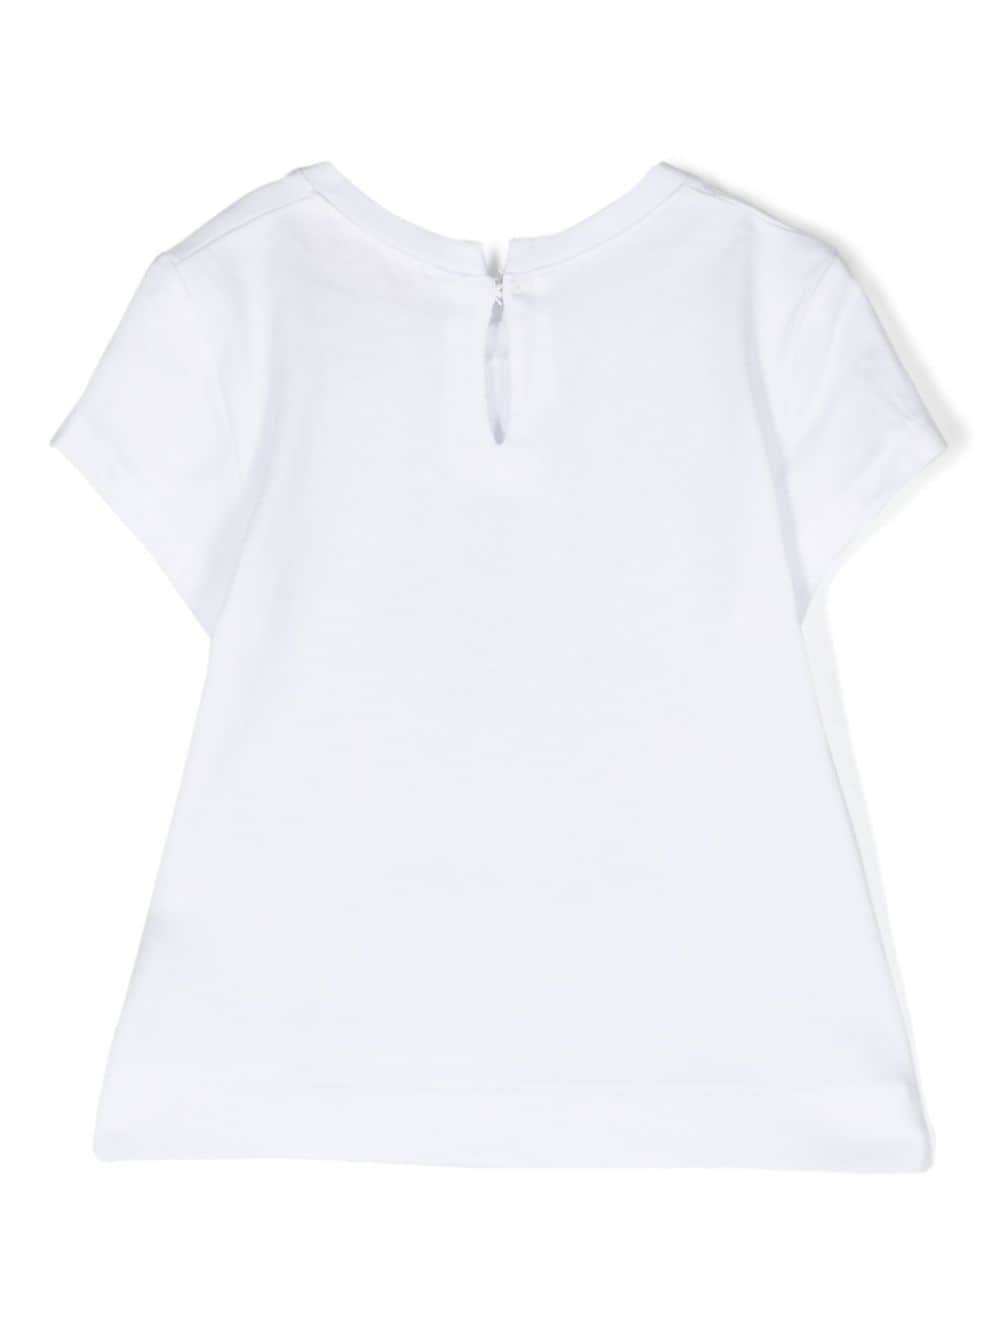 White t-shirt for baby girls with print